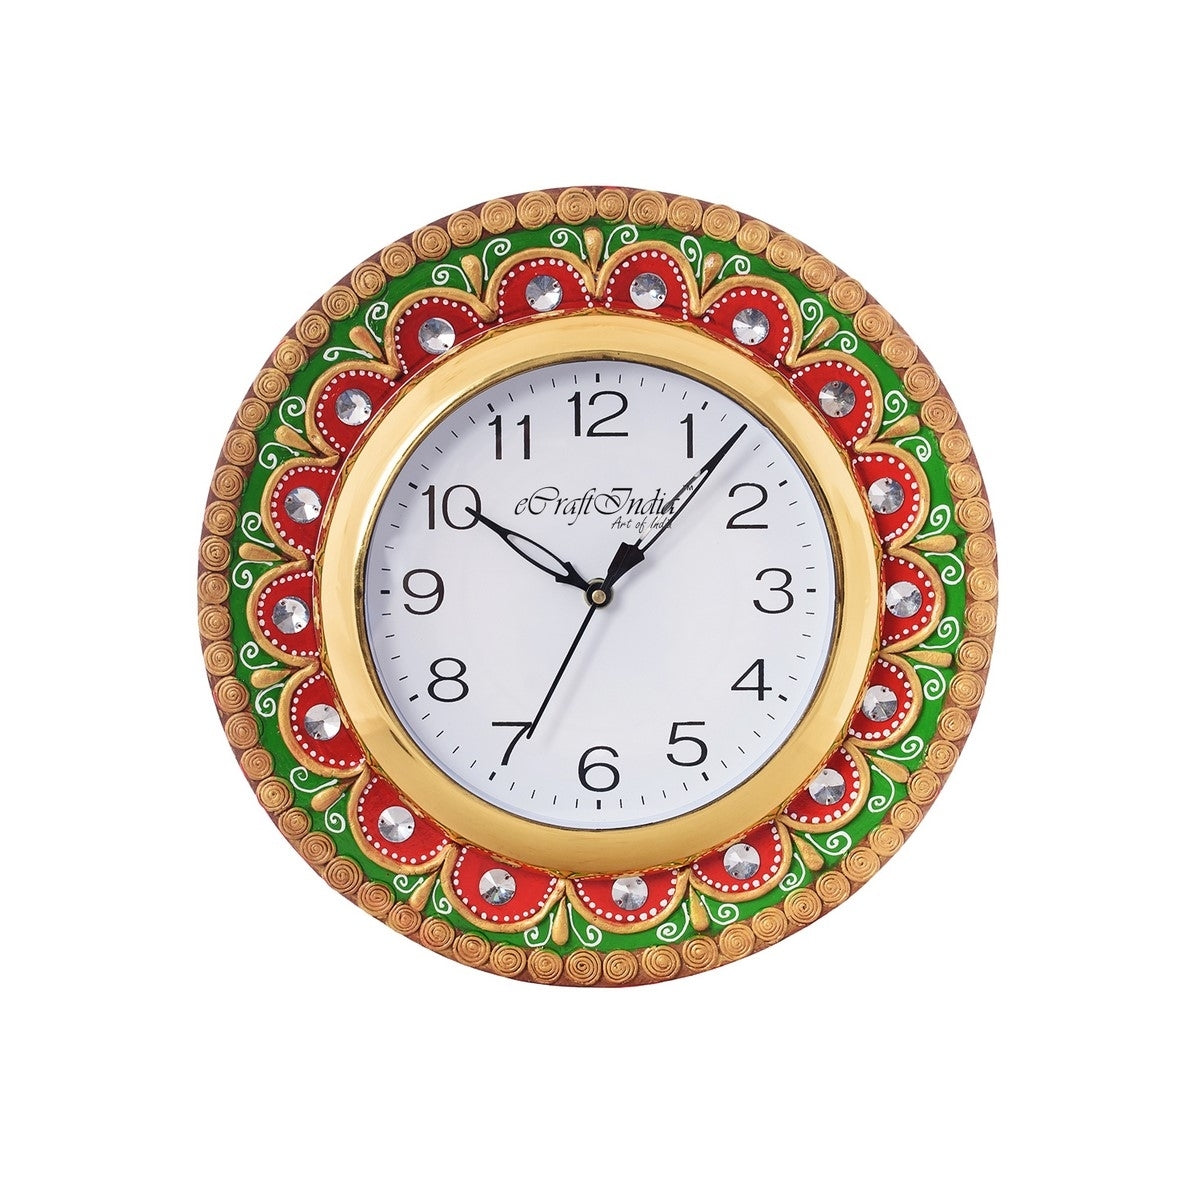 Crystal Studded Embellish Papier-Mache Wooden Handcrafted Wall Clock